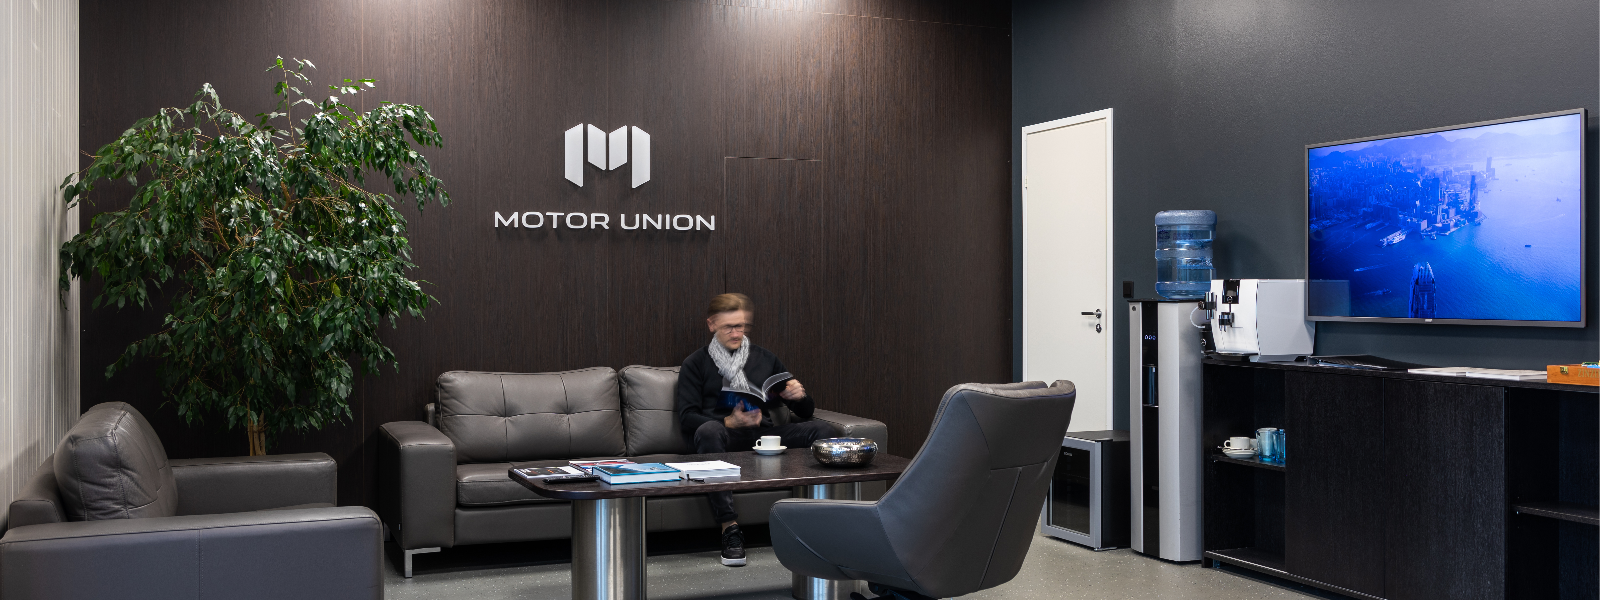 MOTOR UNION OÜ - Maintenance and repair of motor vehicles and other related services, products, consultations